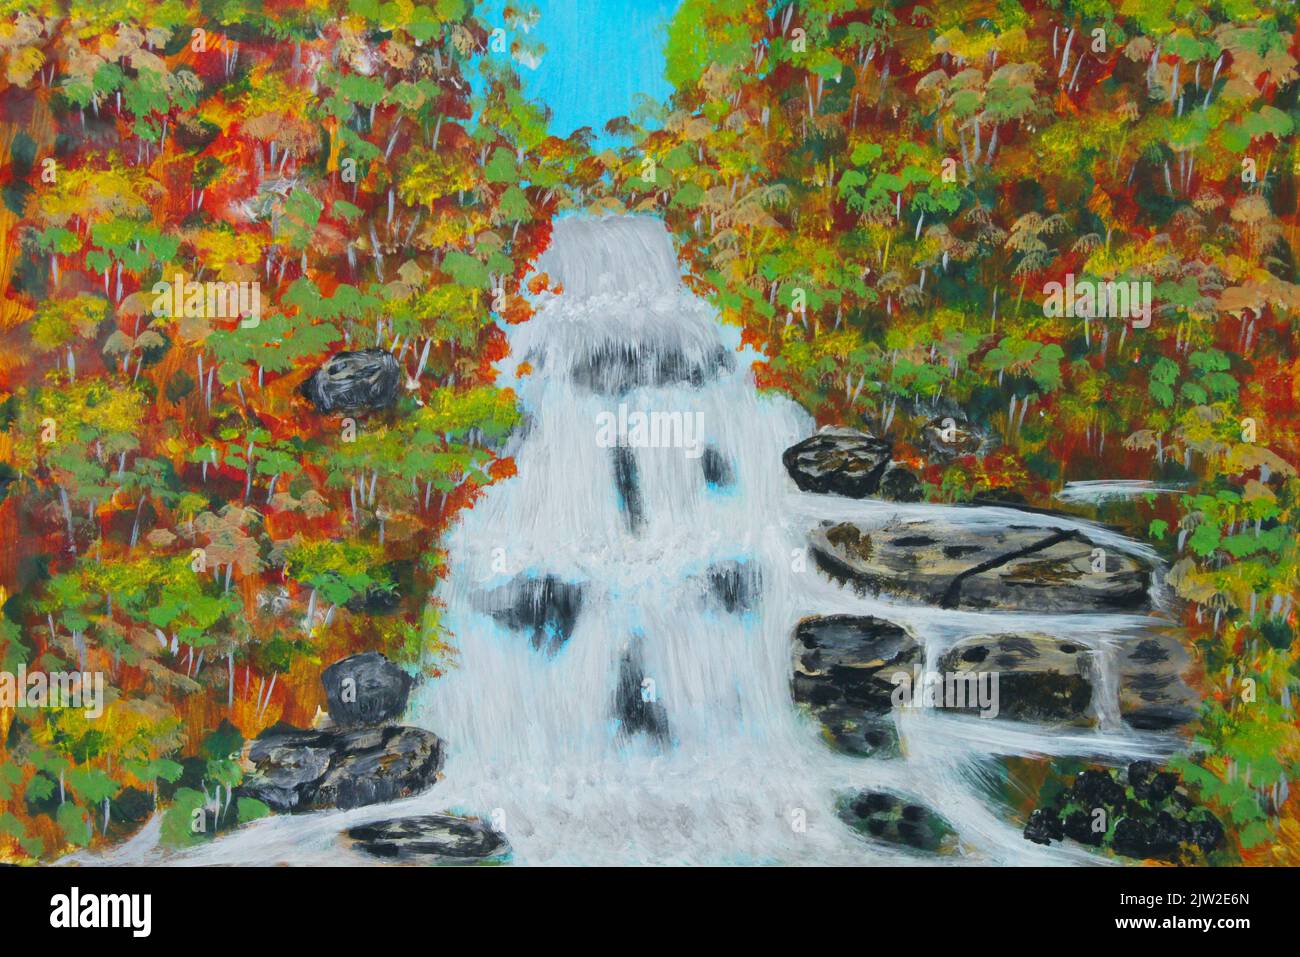 - and stock Alamy Illustration hi-res photography images waterfall